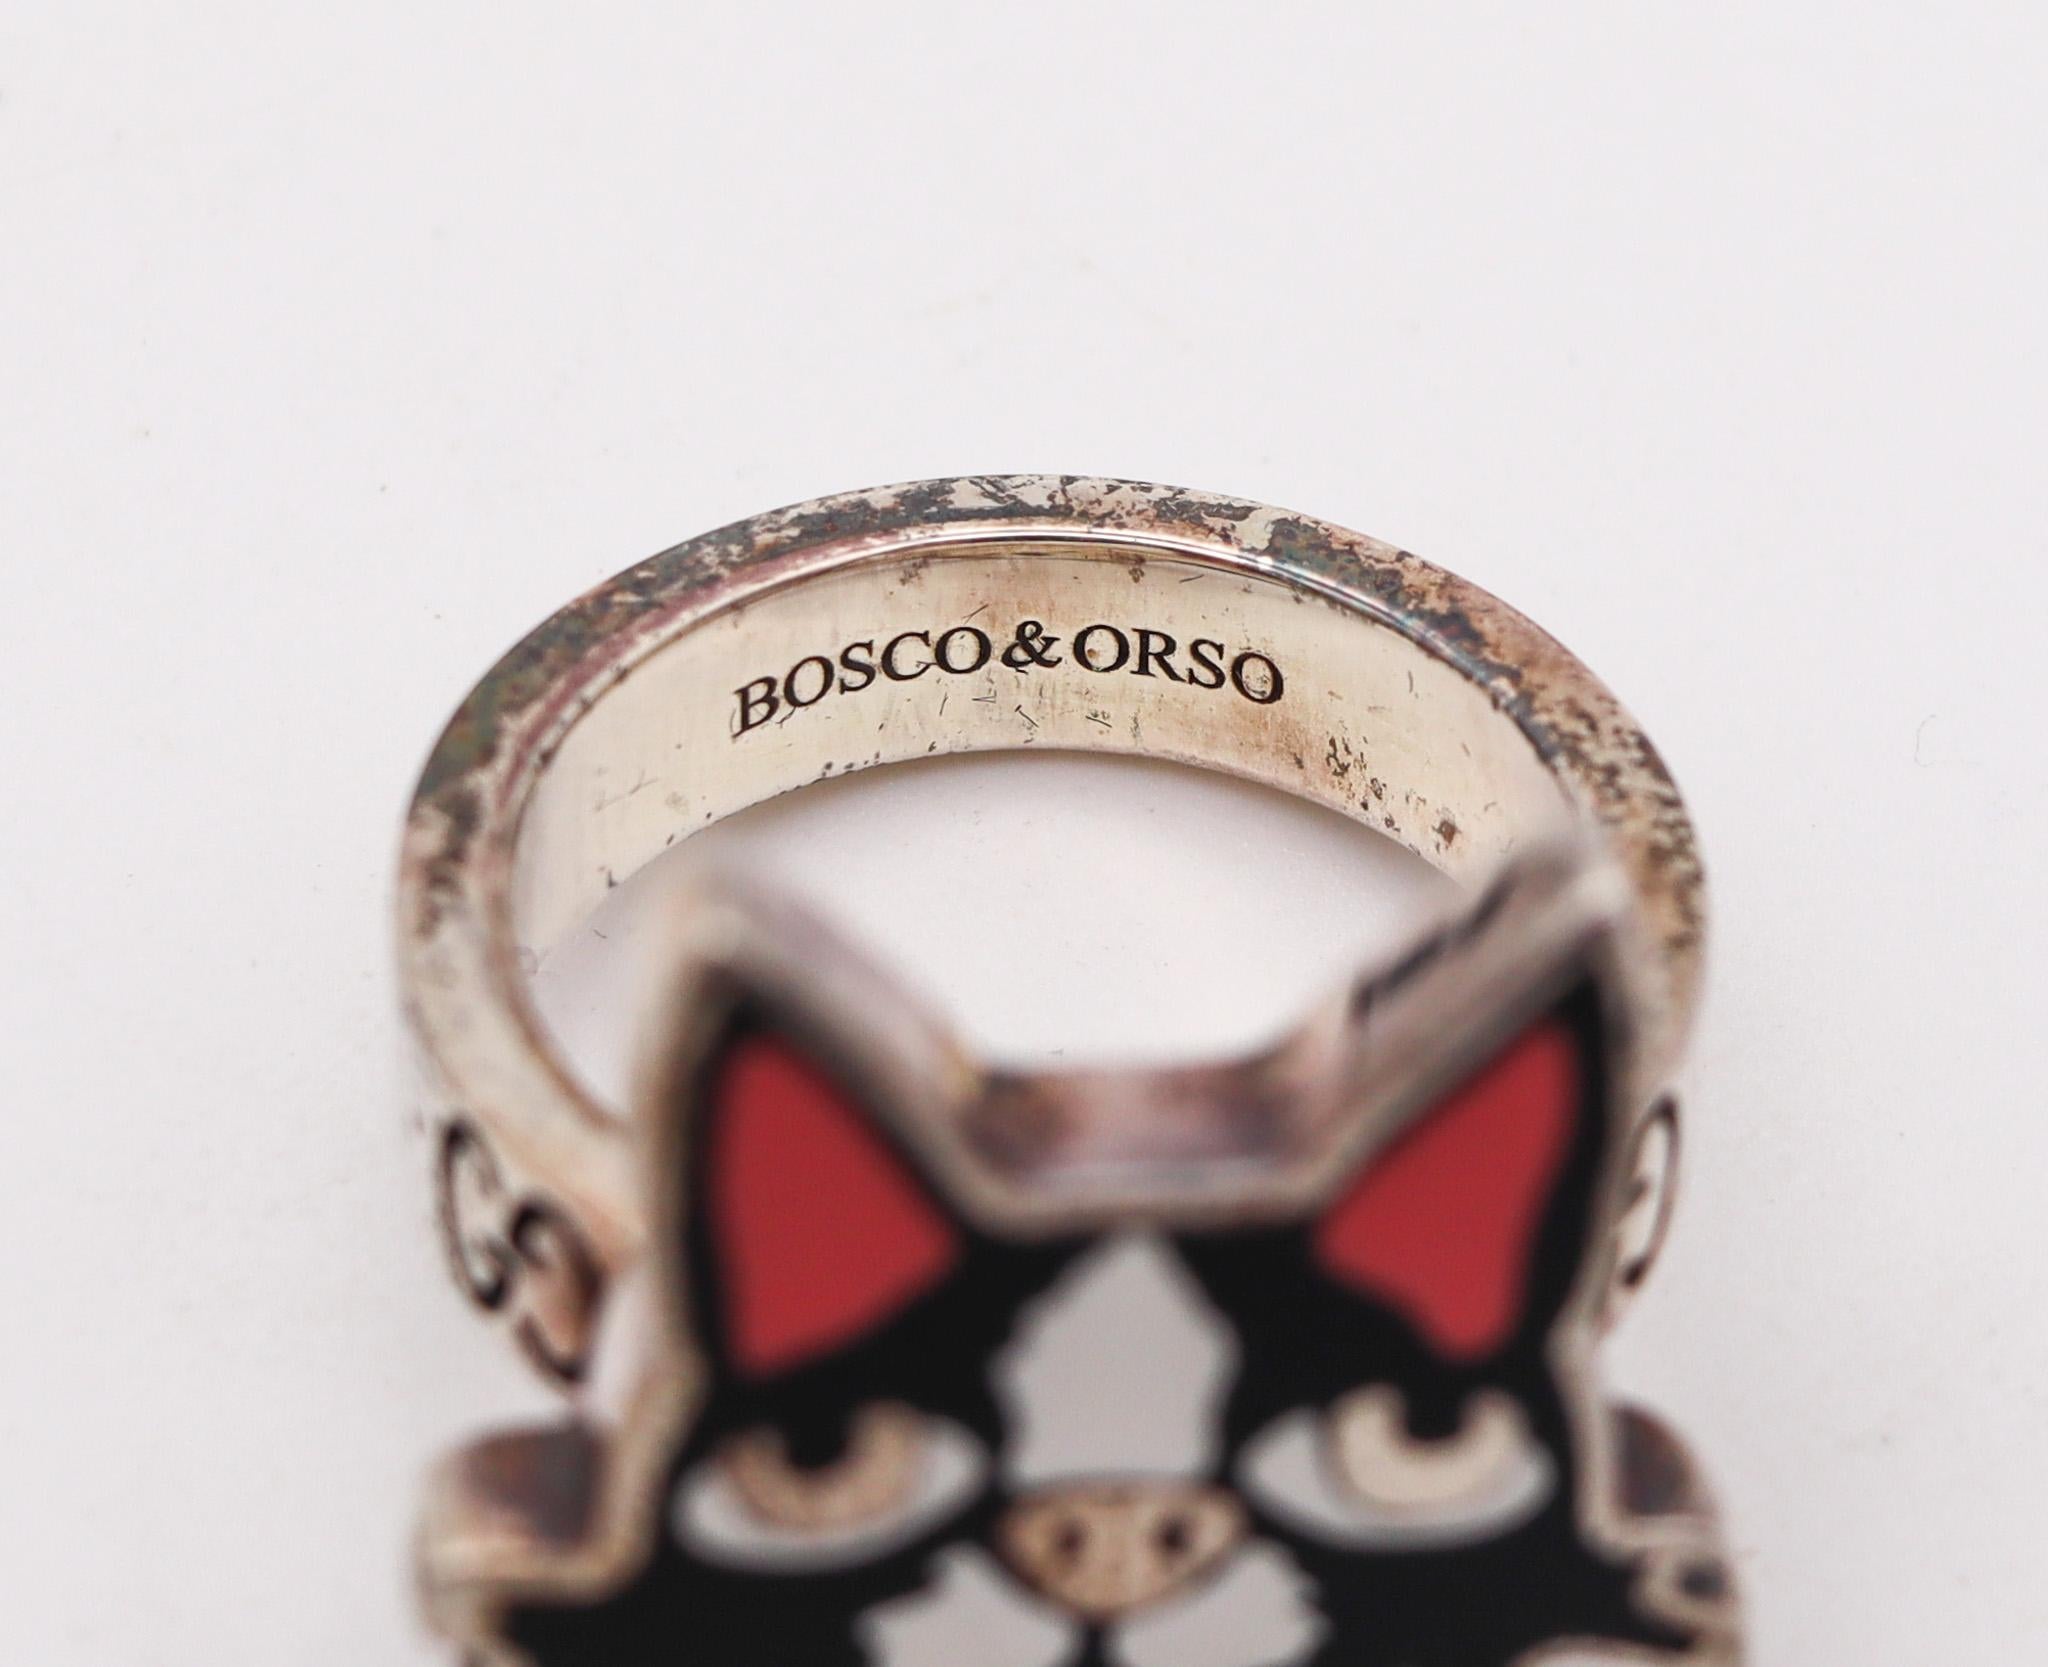 Gucci Milano 2018 Bosco And Orso Enameled Ring In Solid .925 Sterling Silver 1